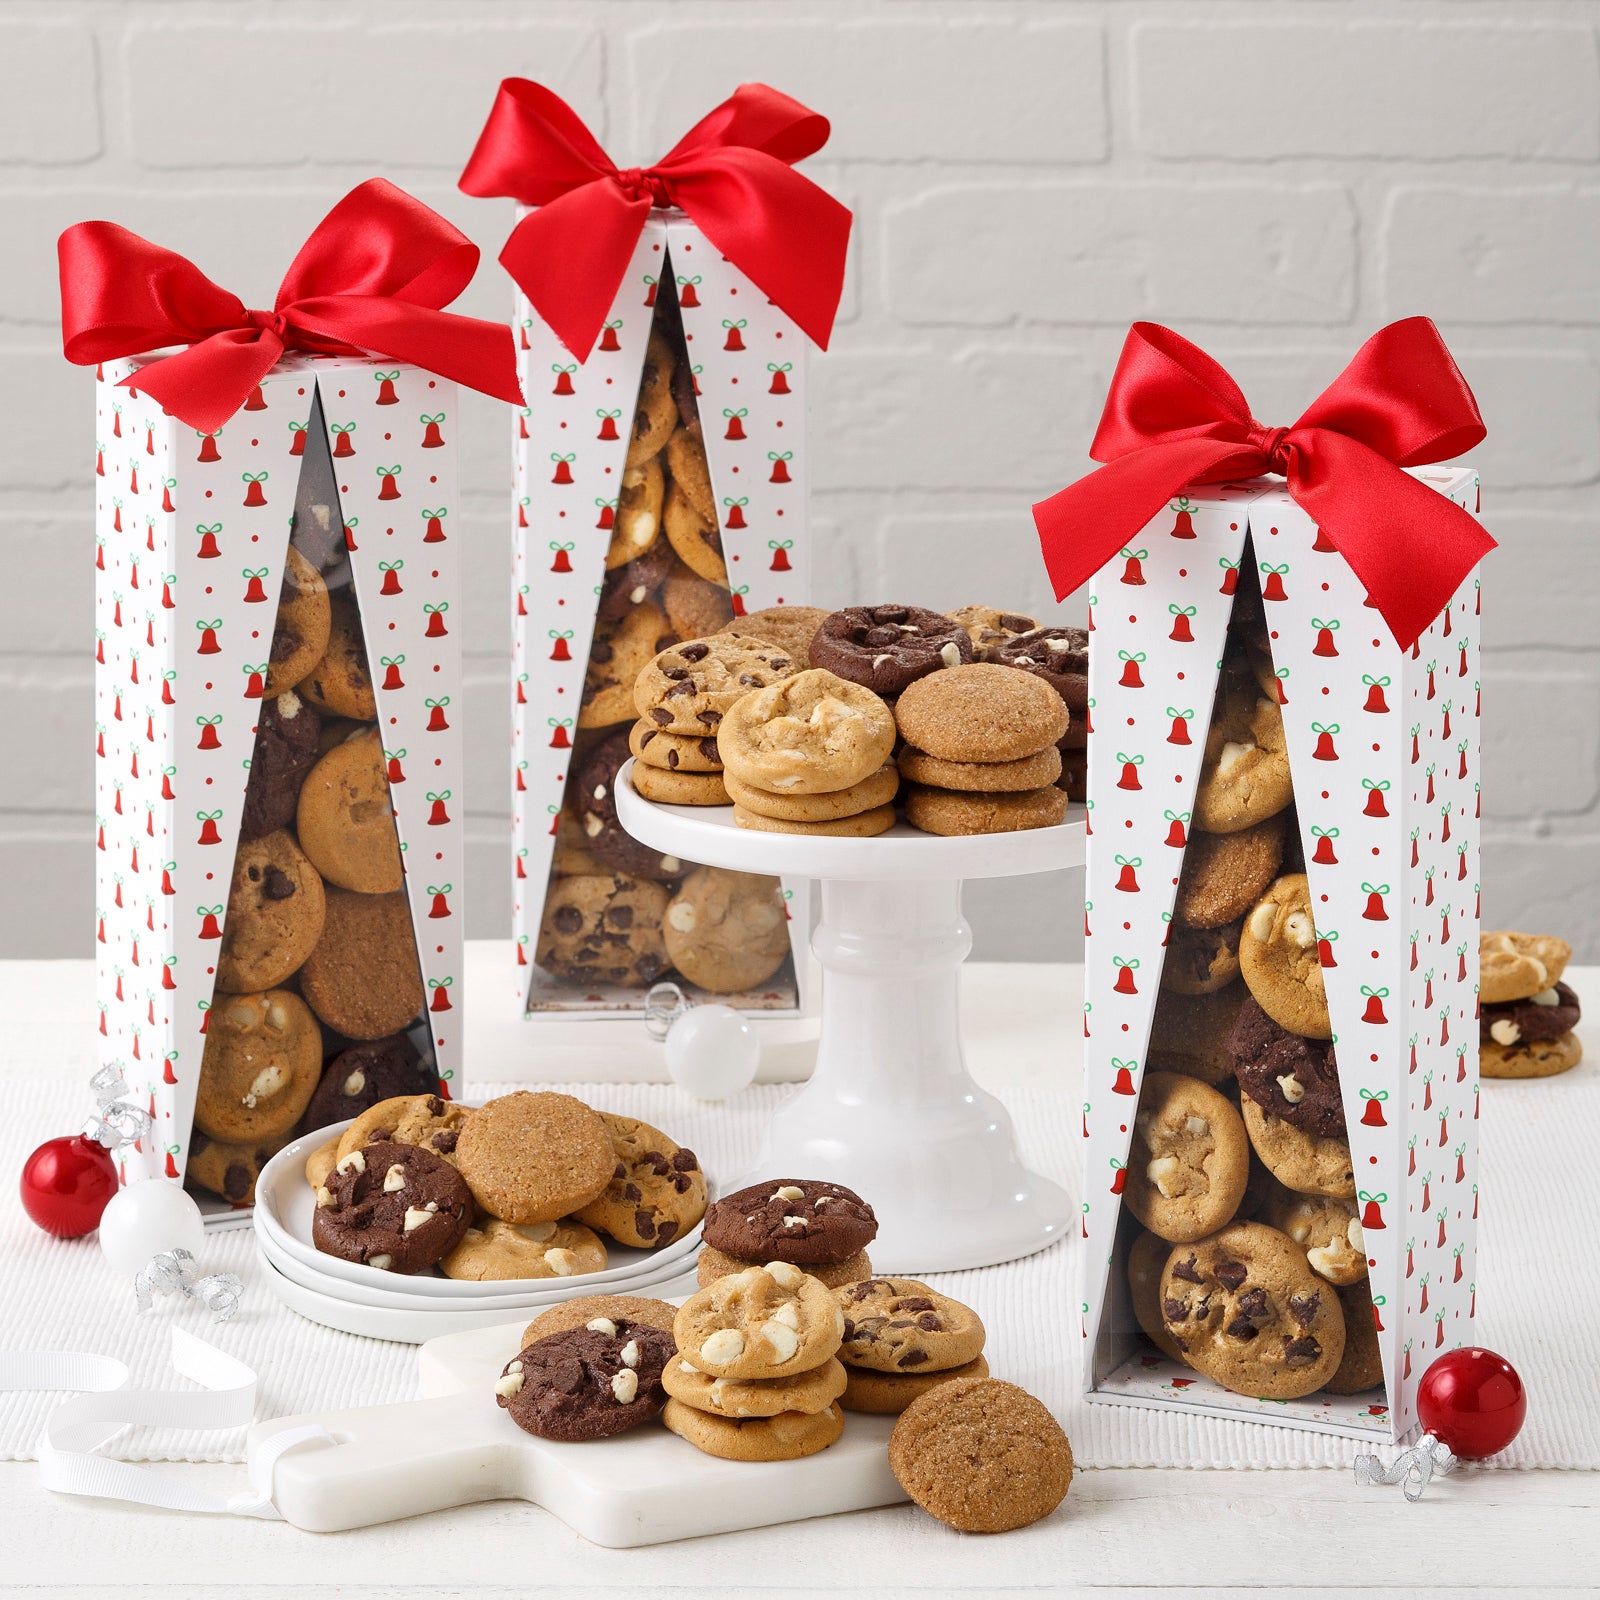 A group of holiday-themed gift boxes covered in bells with a red ribbon on top filled with an assortment of Nibblers® Bite-Sized Cookies.